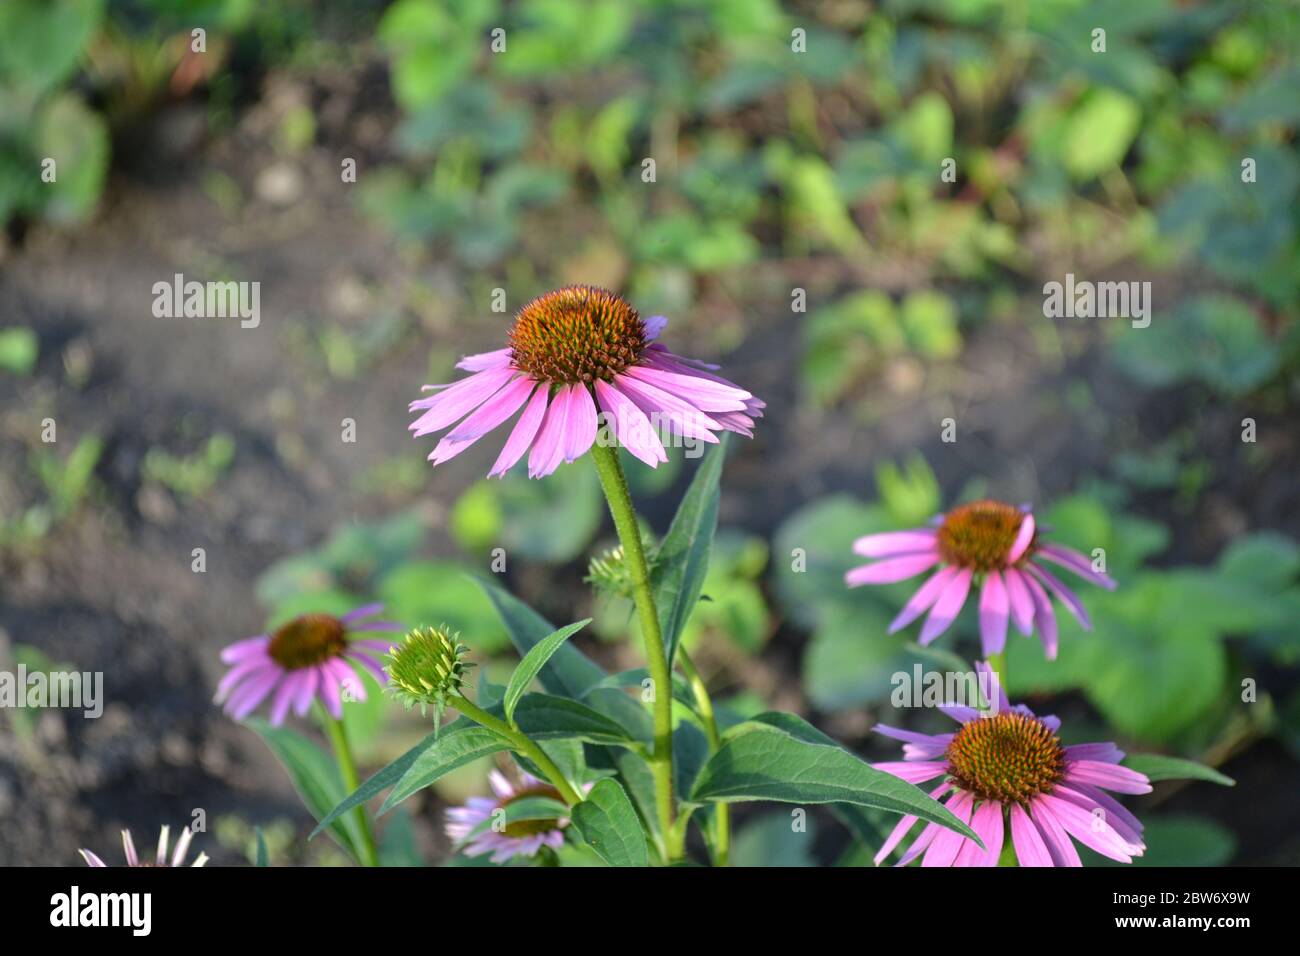 Green leaves, bushes. Gardening. Home garden, flower bed. Echinacea flower. Echinacea purpurea. A perennial plant of the Asteraceae family. Curative f Stock Photo